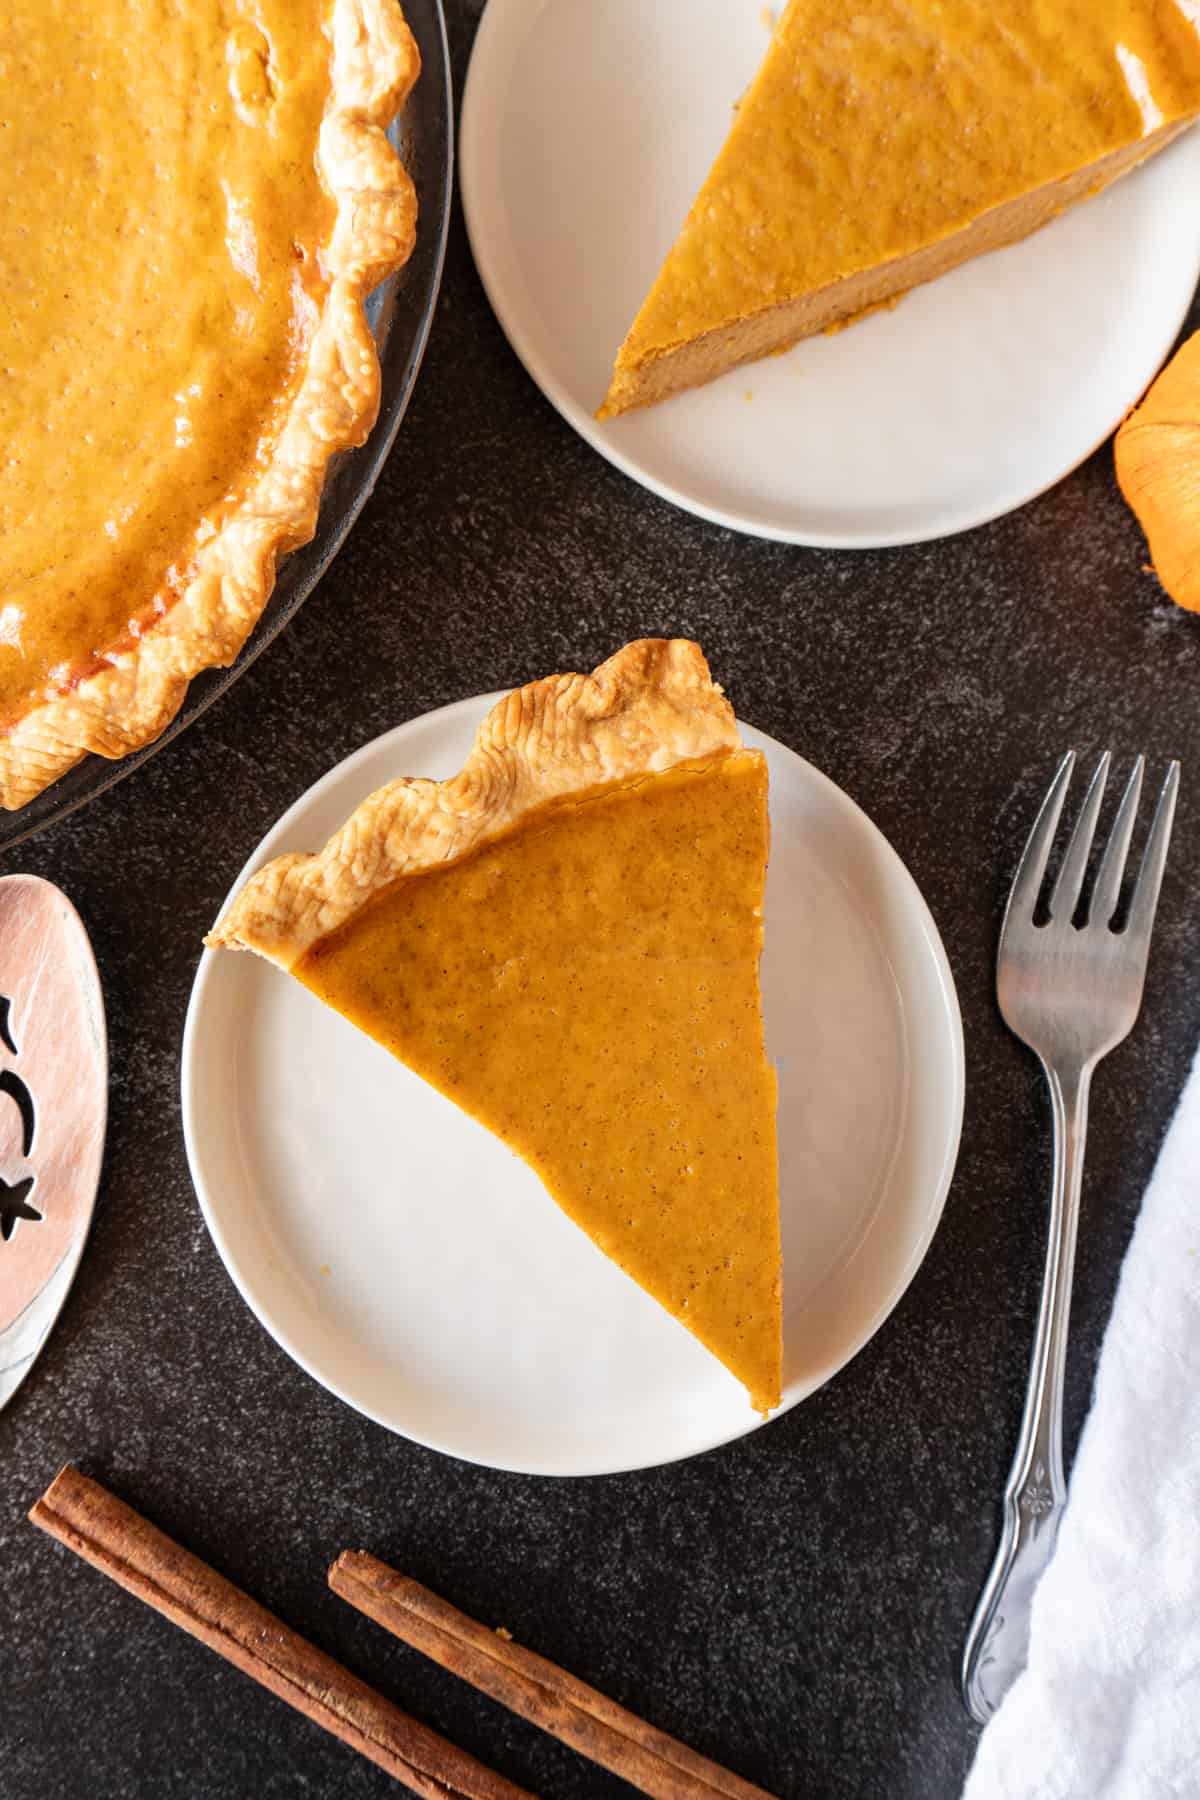 slice of pie on plate with fork next to it